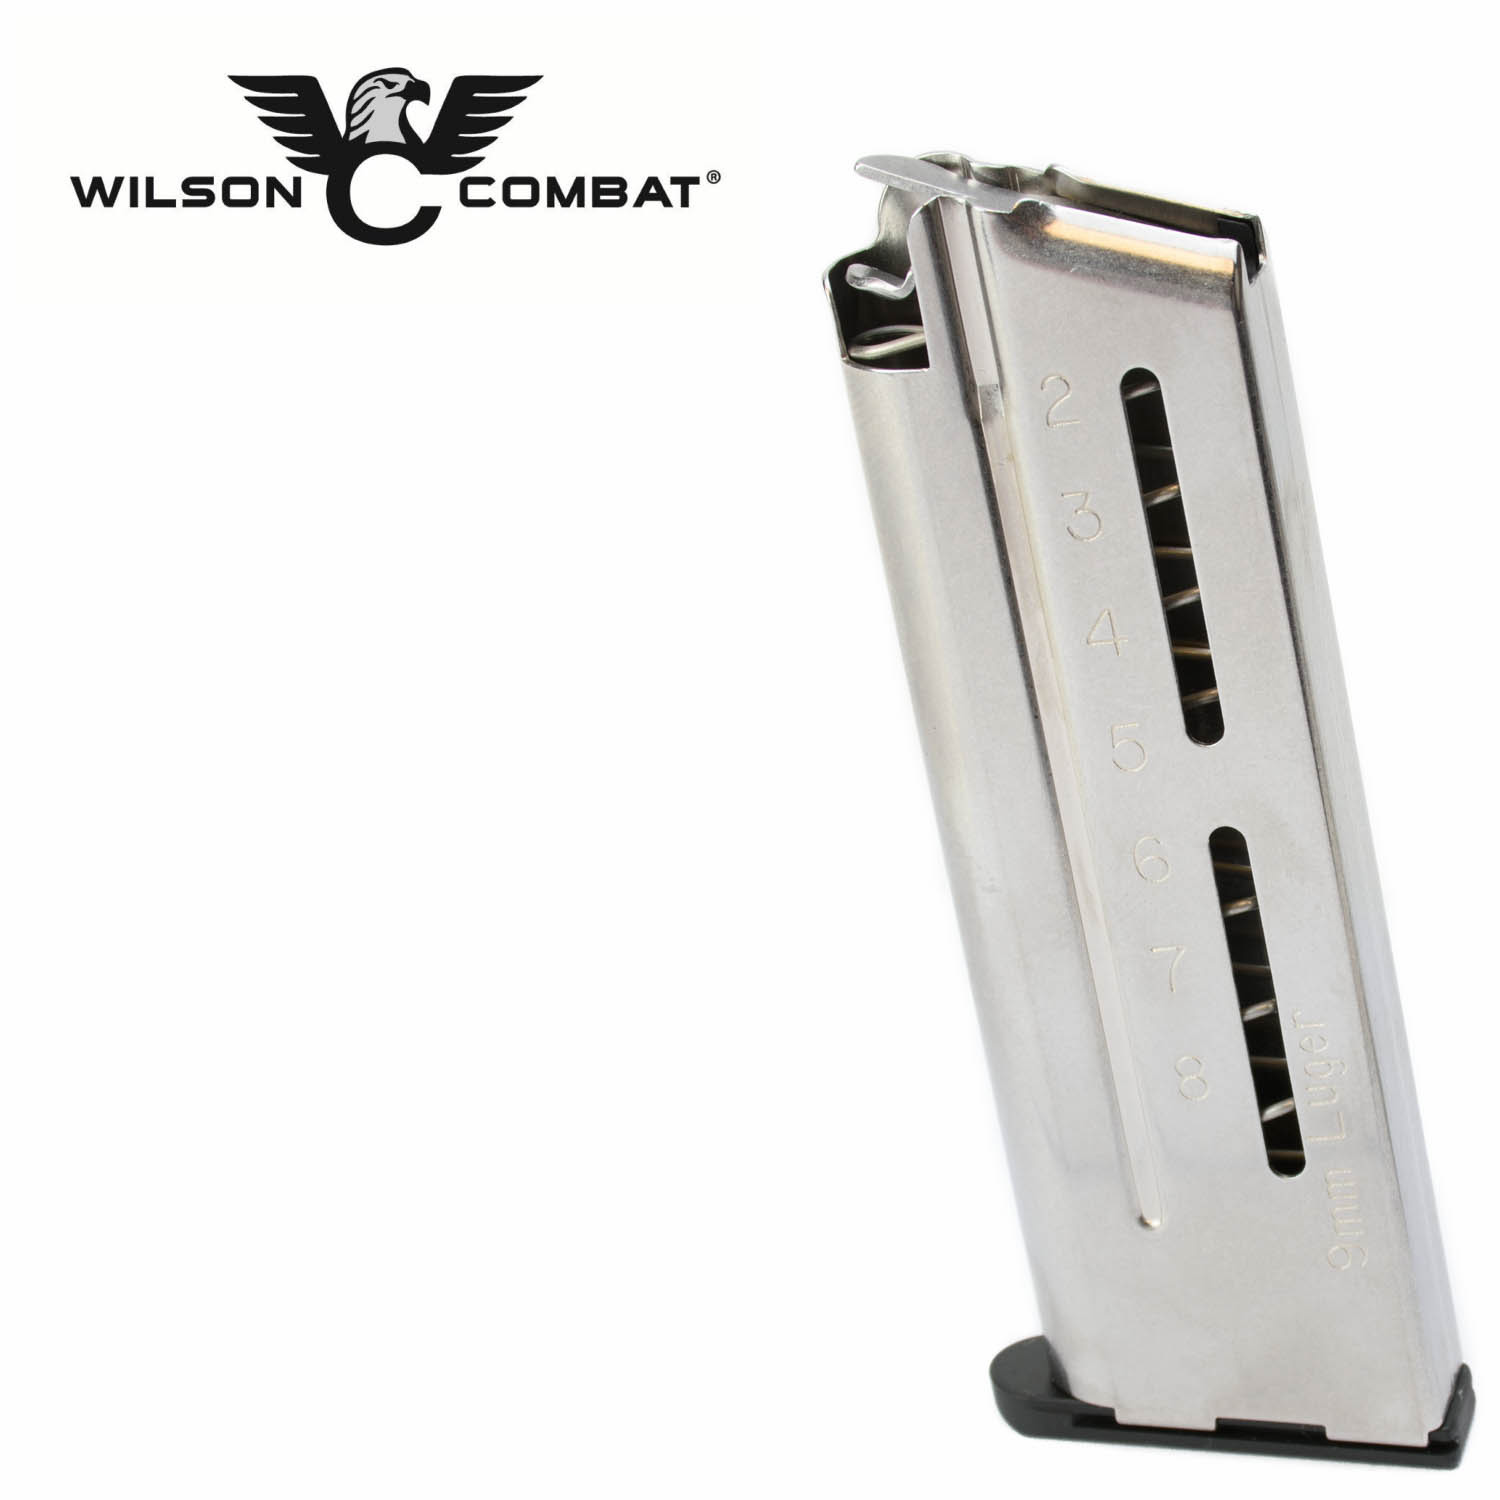 Wilson Combat 500 9c Elite Tactical Magazine 8 Round Compact Stainless 1911 9mm for sale online 